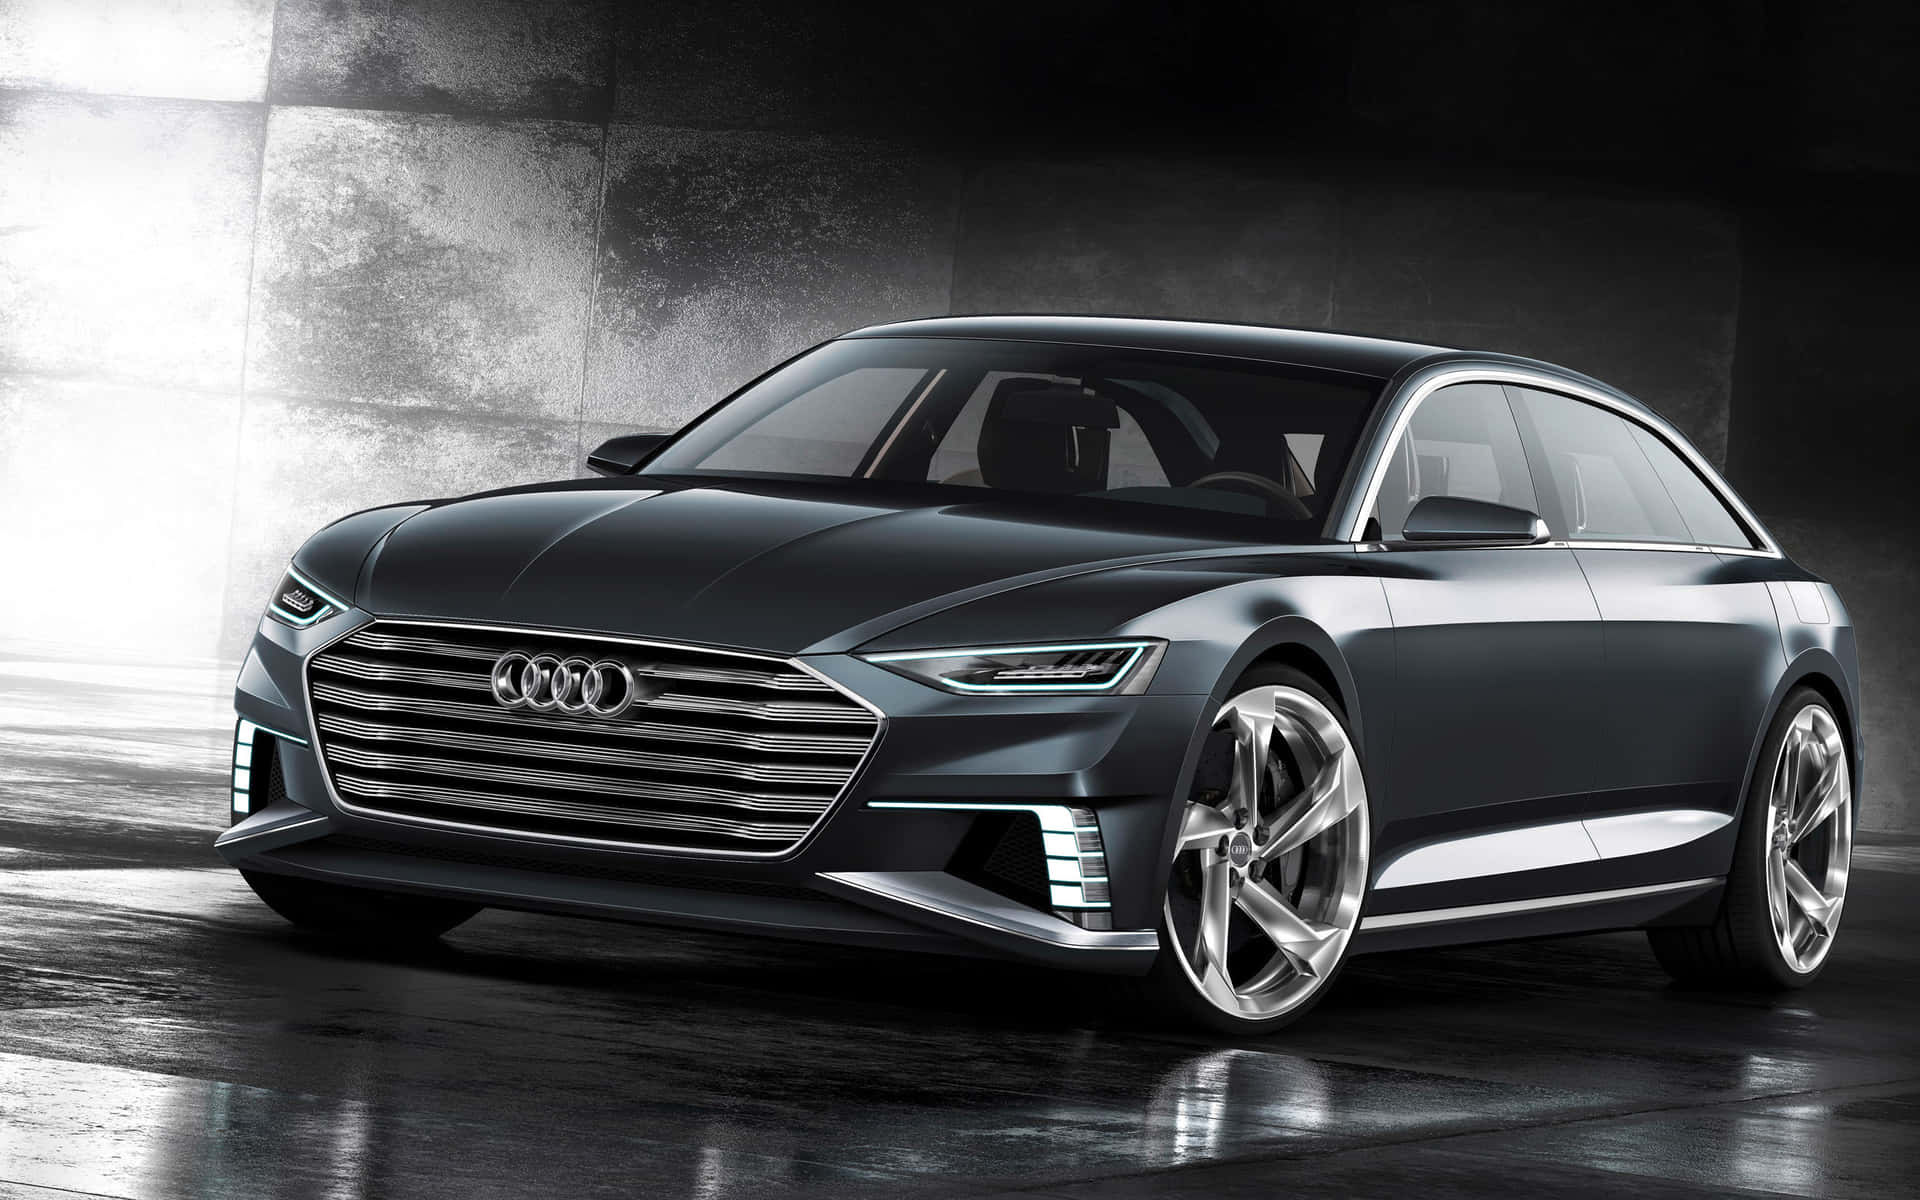 Audi Cars Wallpapers 72 images